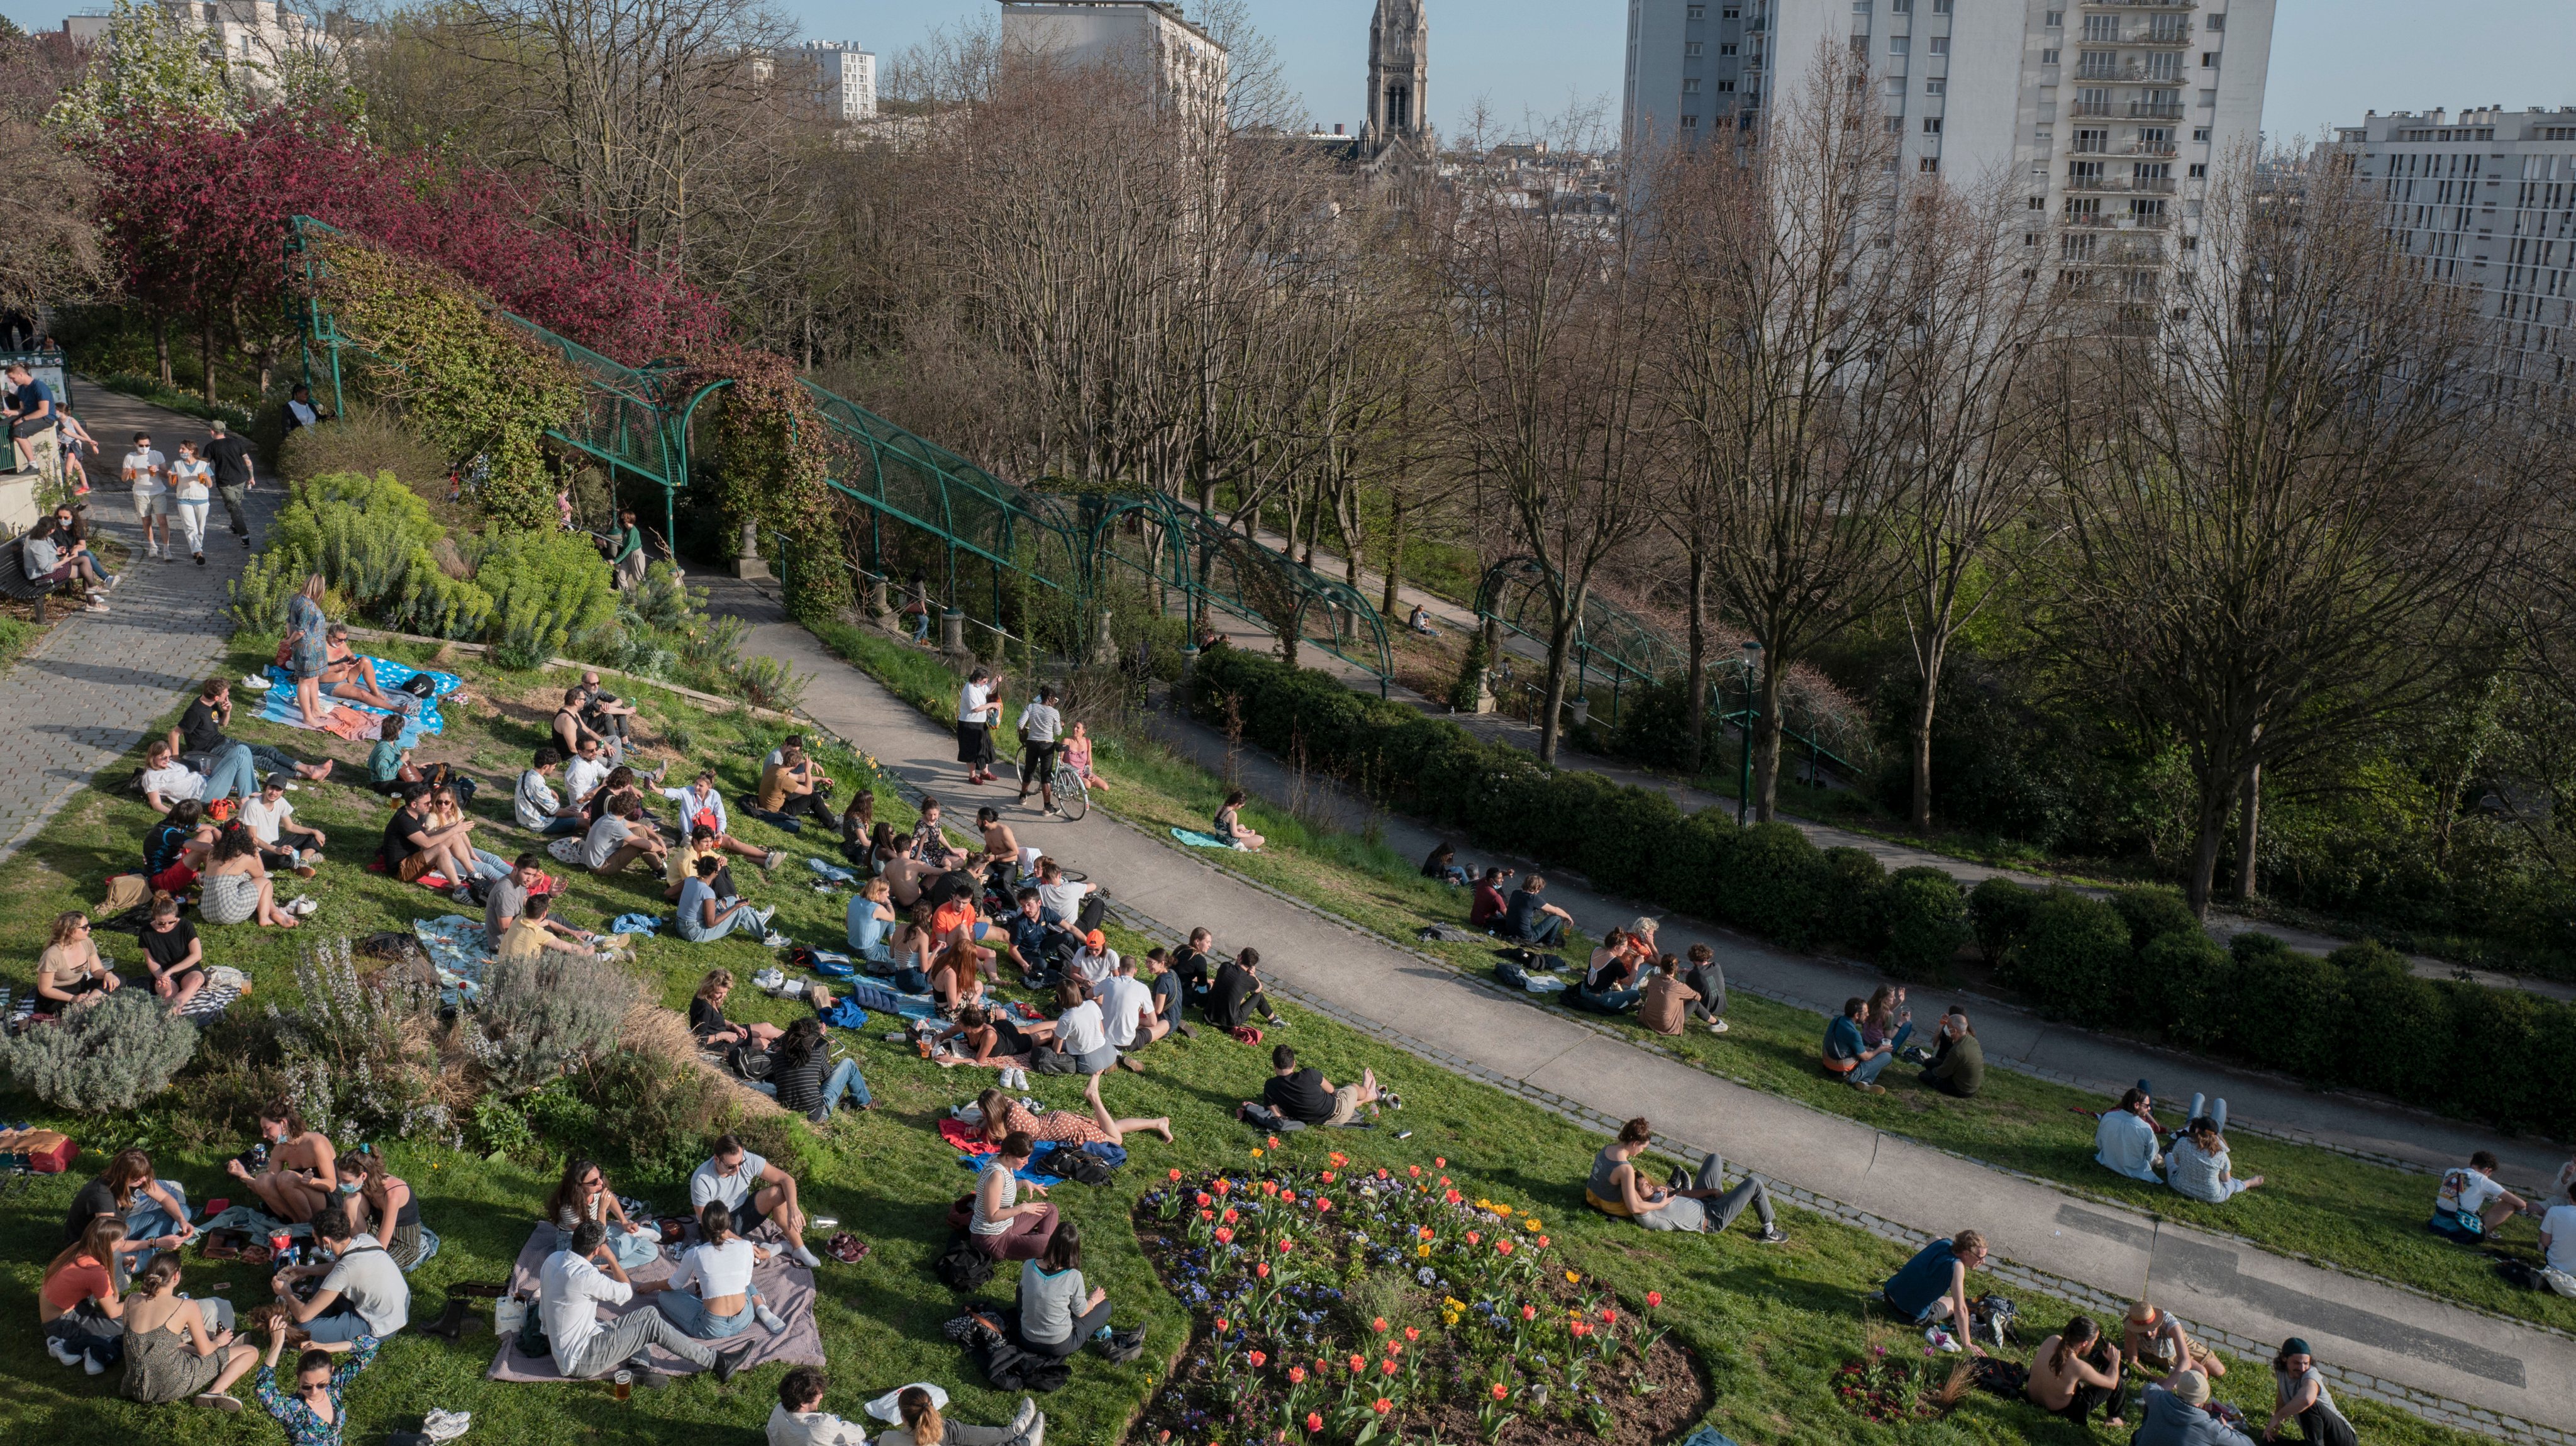 Parisians Enjoy Warm Weather As Further Covid-19 Restrictions Expected